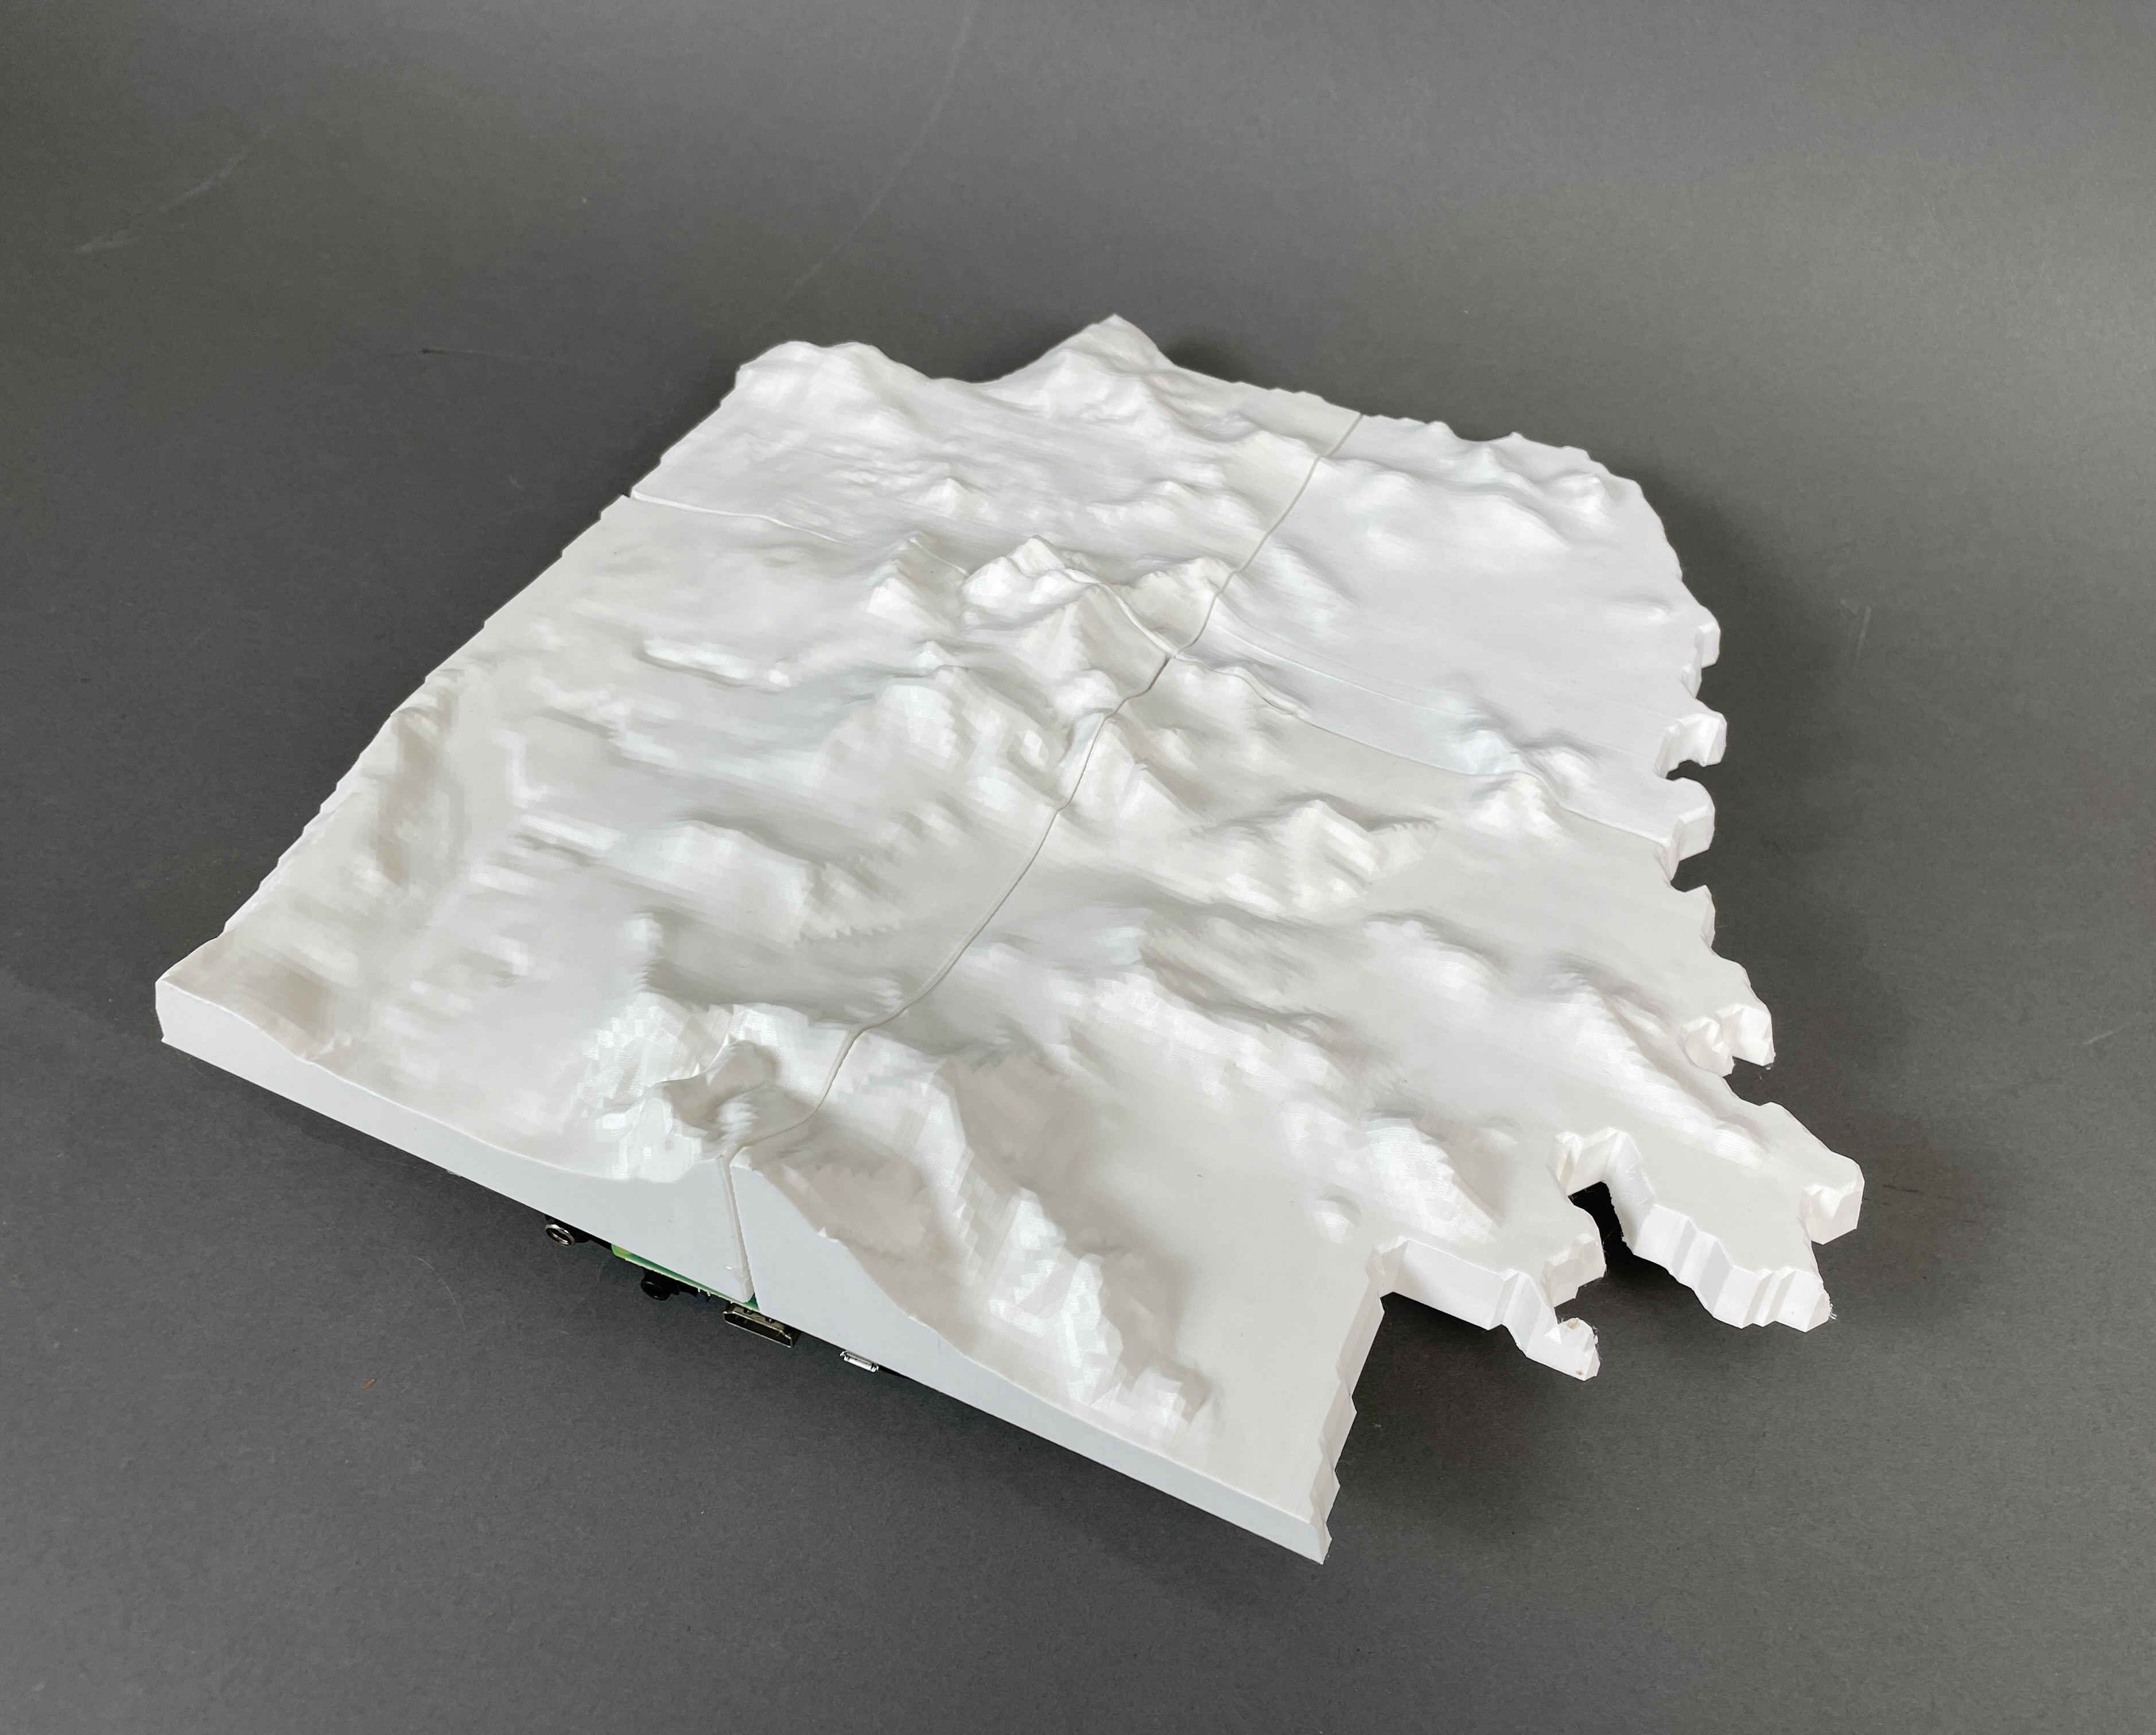 Side view of the topographic 3D-printed map